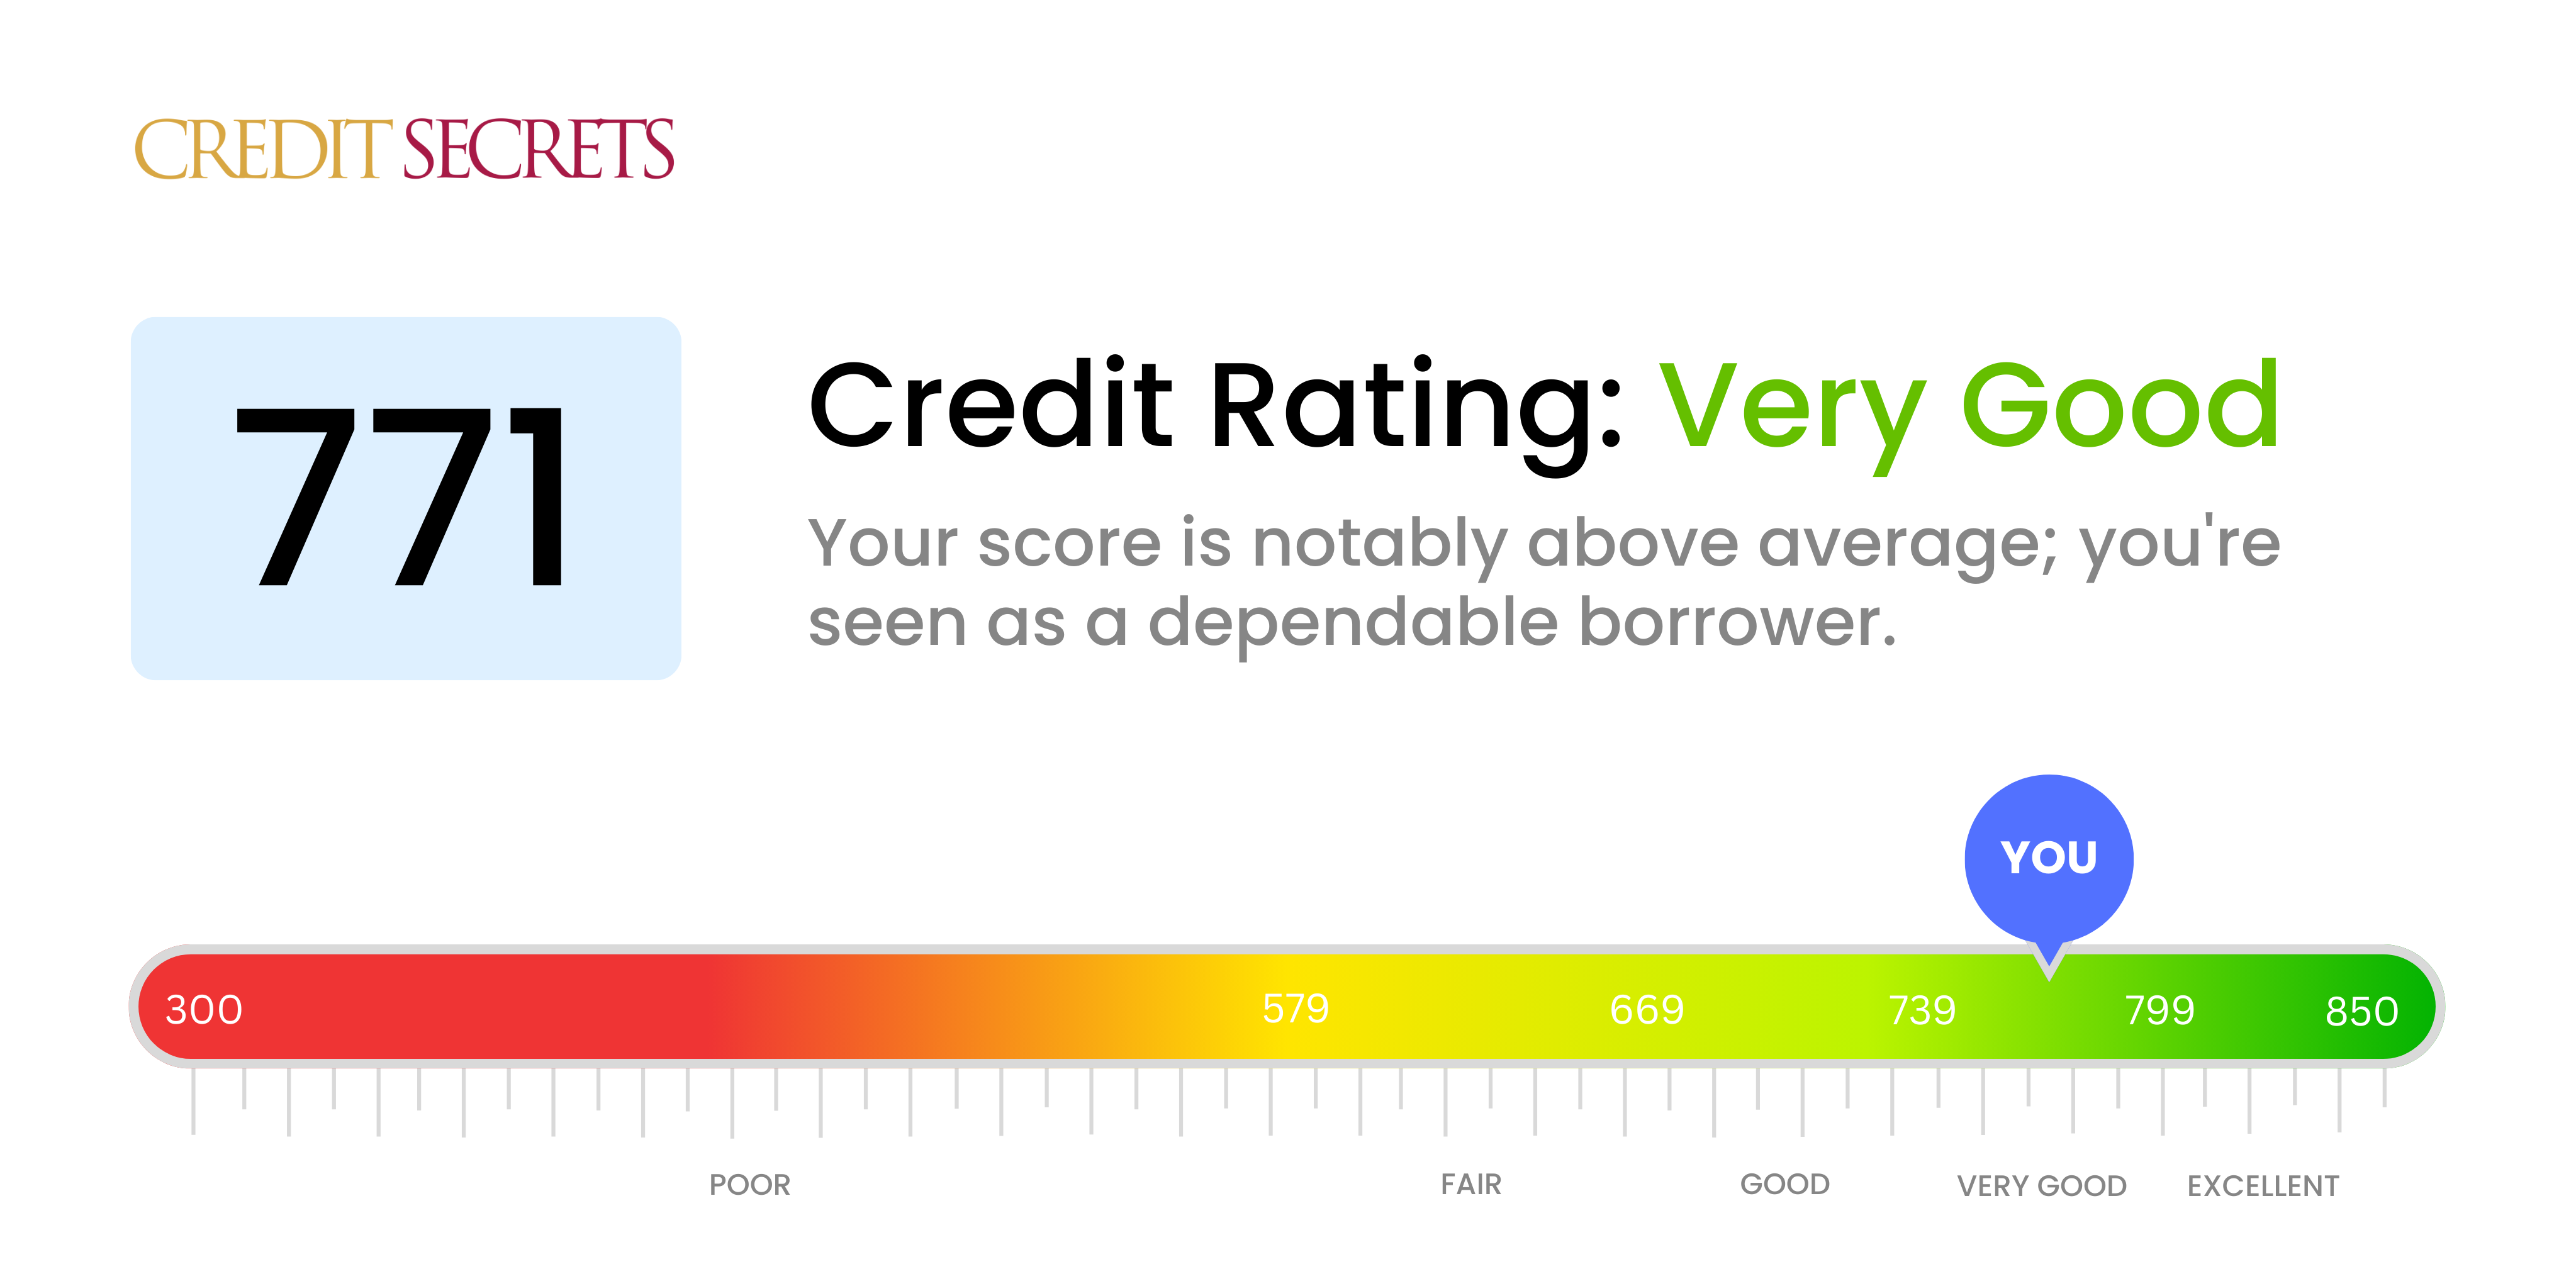 Is 771 a good credit score?